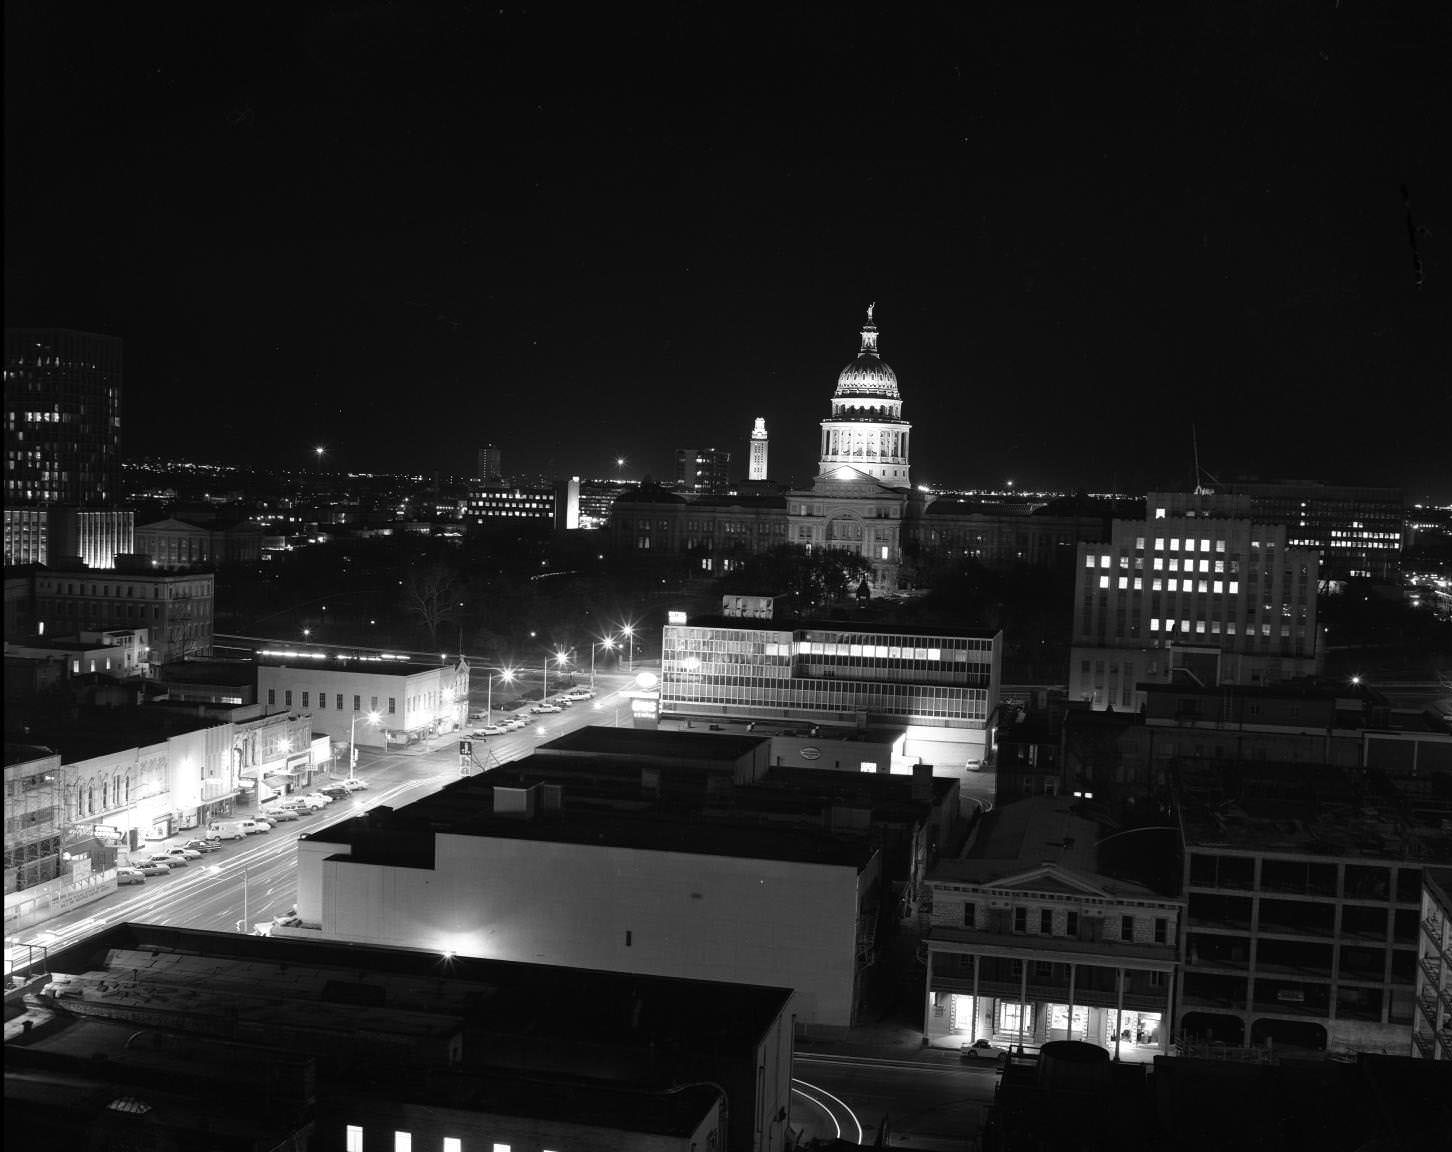 Austin, Texas shot from downtown on South Congress showing the State Capitol lit up at night, 1968